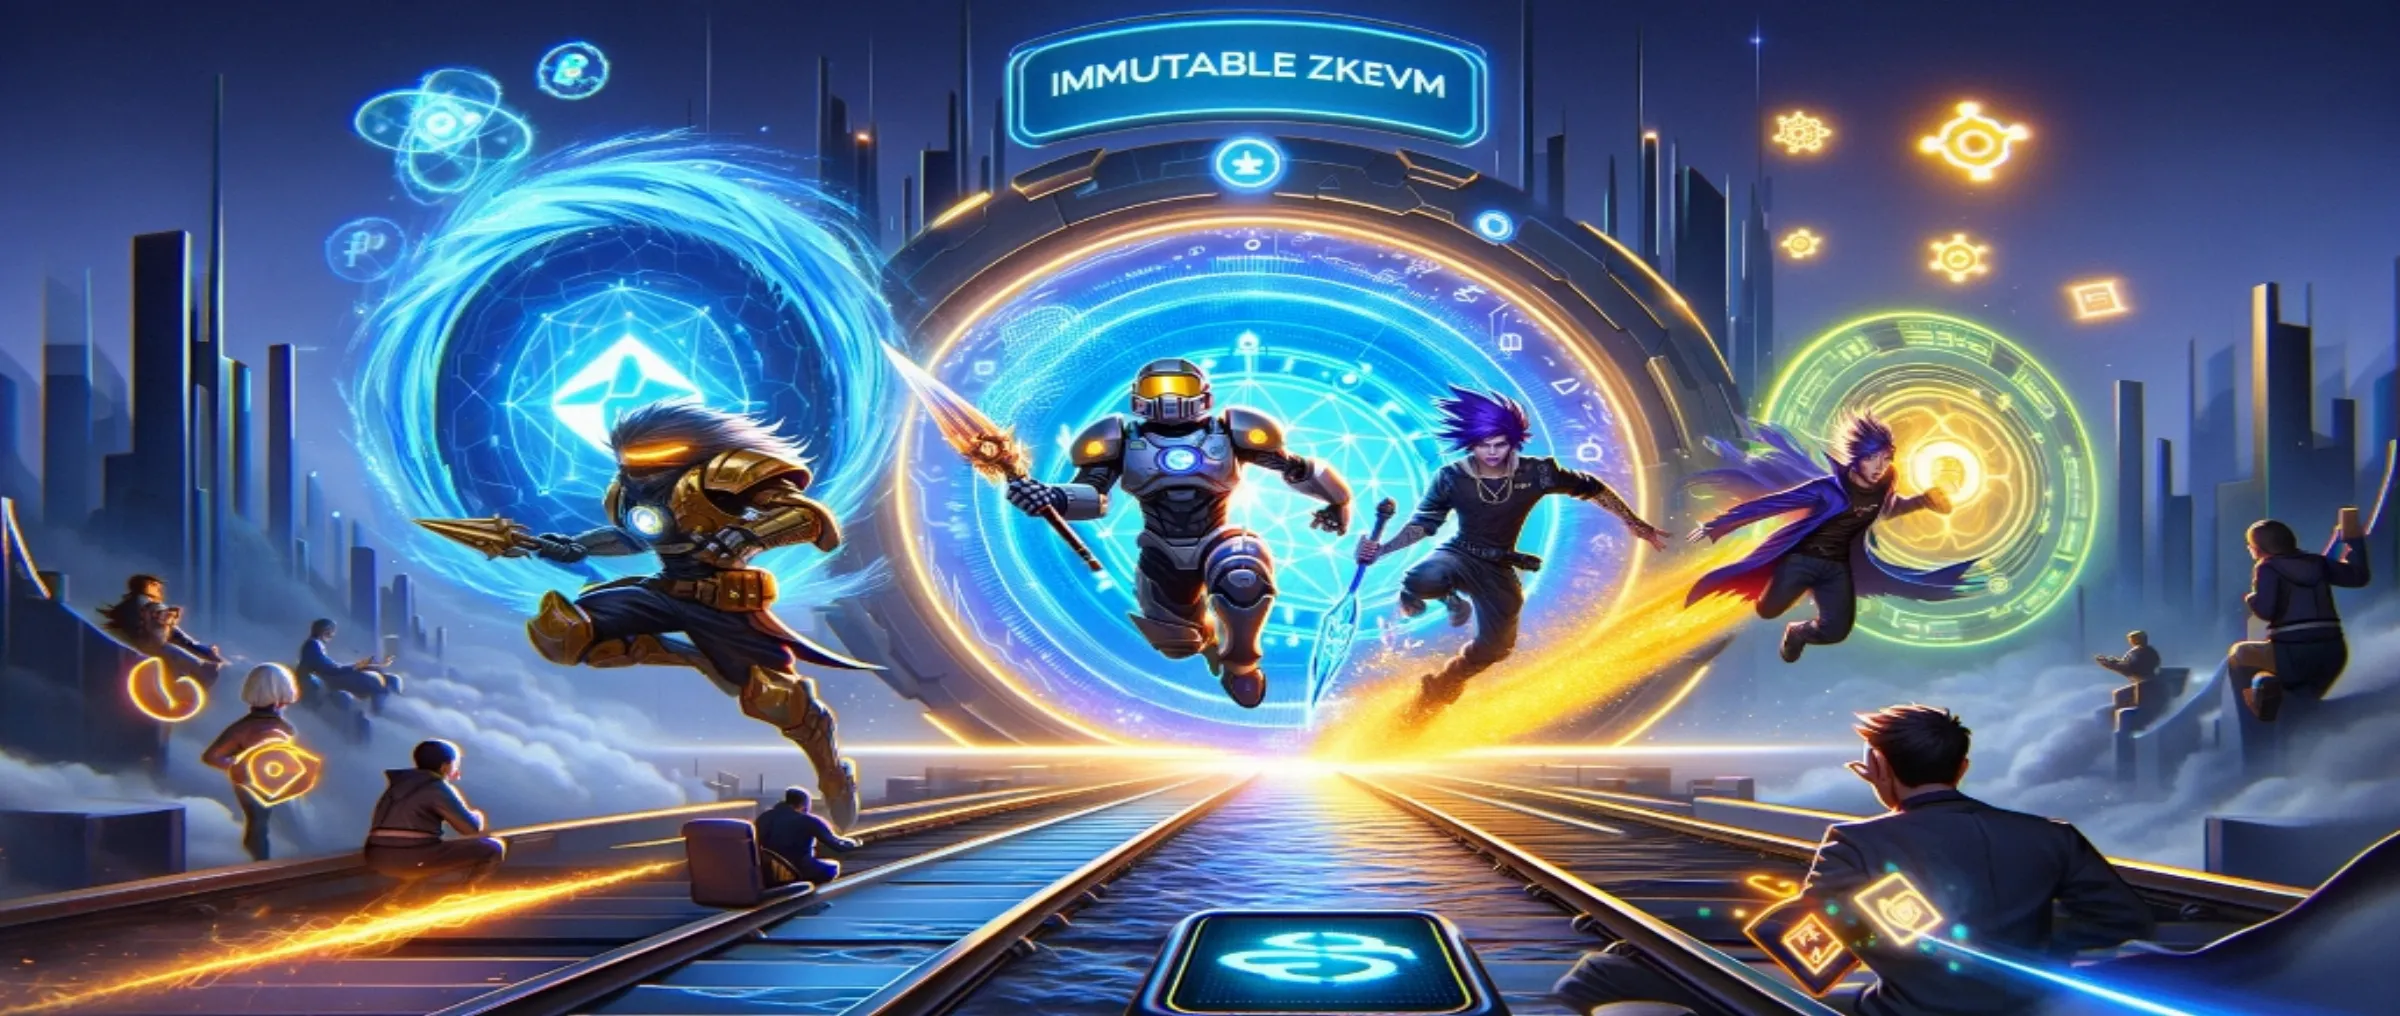 Blast Royale, Storm Warfare and TapNation games are moving to Immutable zkEVM